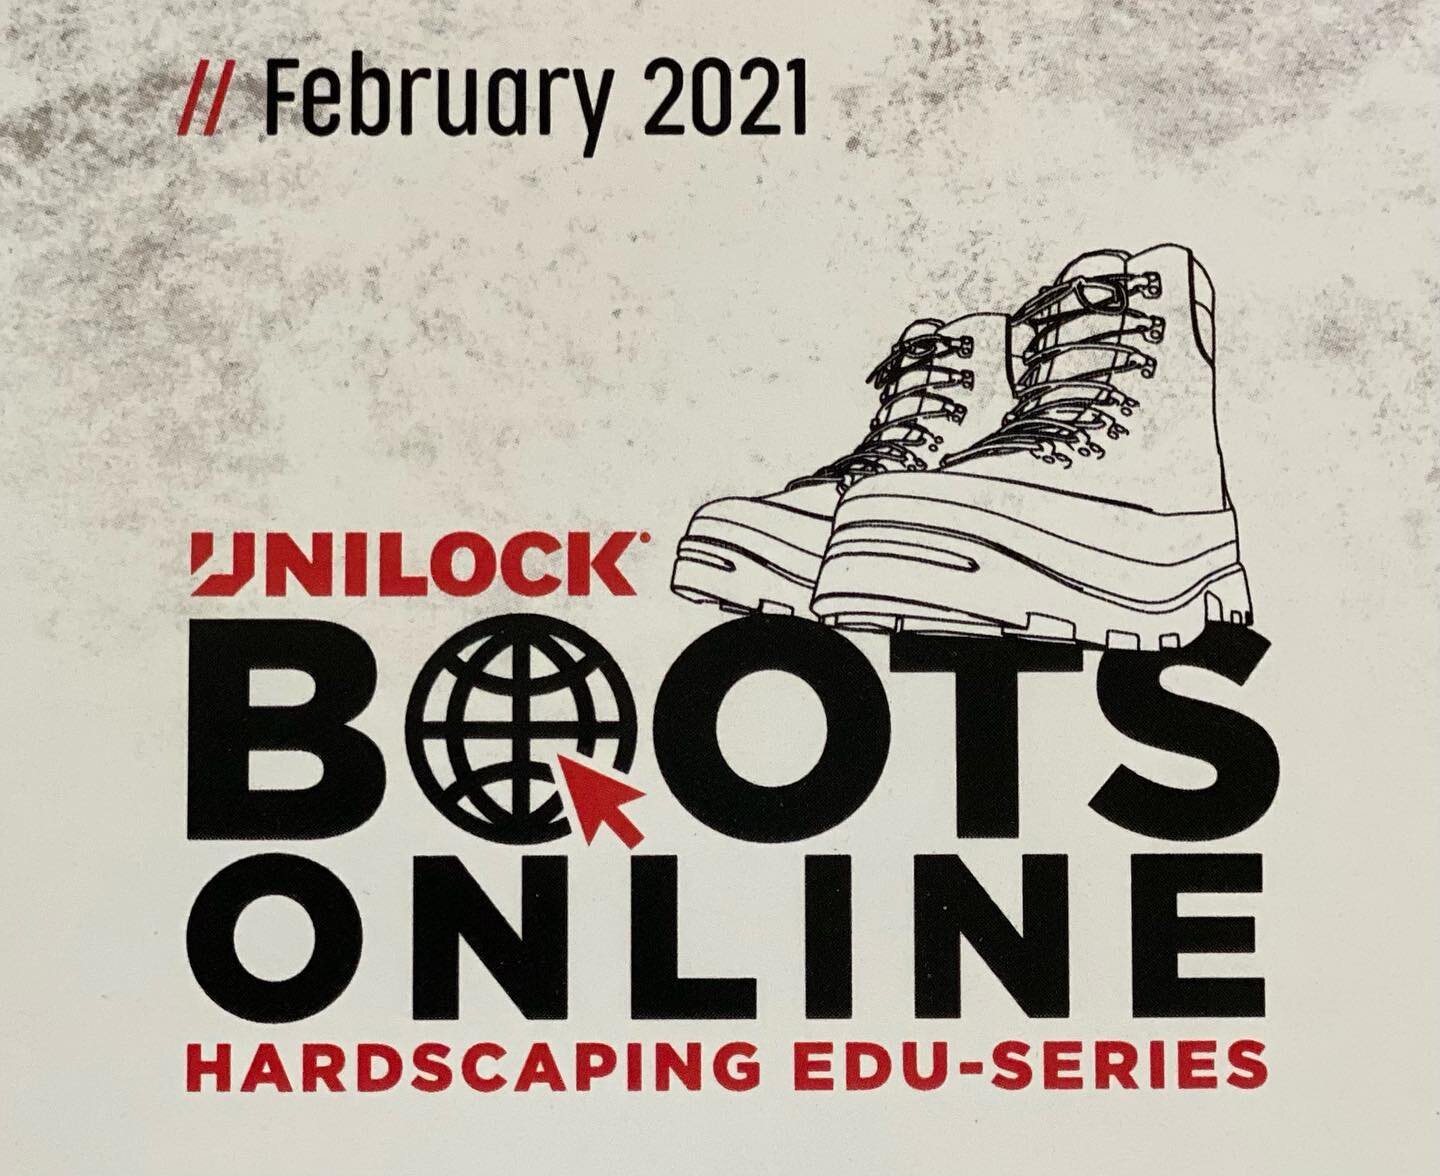 ATTENTION ALL CONTRACTORS! 

@unilock is hosting their annual contractor seminar! Kick off on their online educational tutorials starting today. You can tune in every Tuesday and Thursday this month to check out @unilock hottest new trends for 2021! 